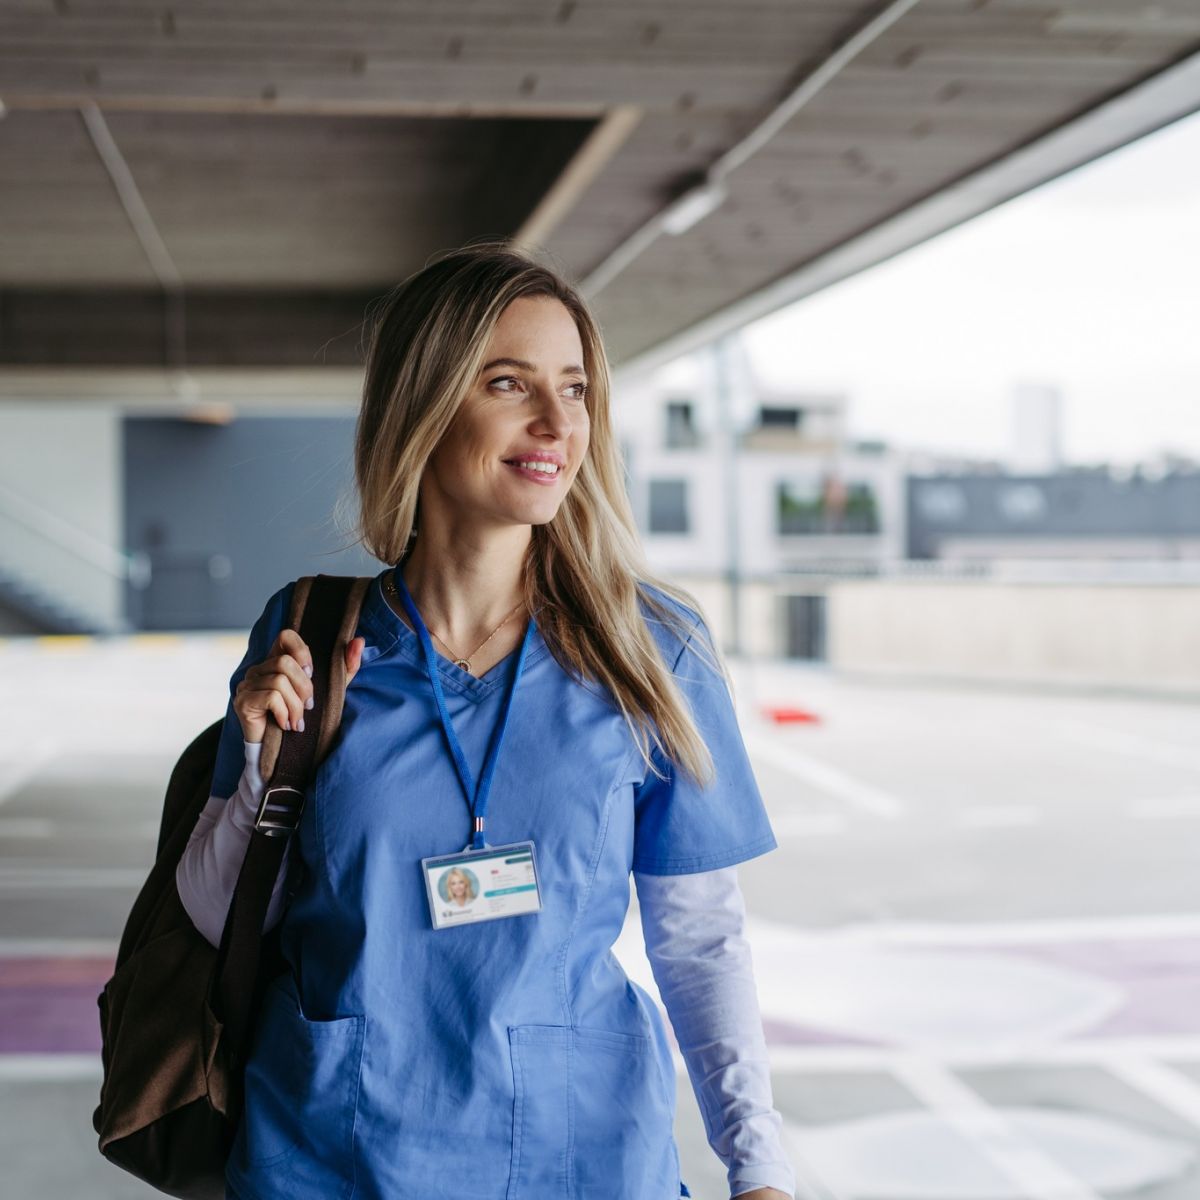 Young female nurse walking to work in a parking garage